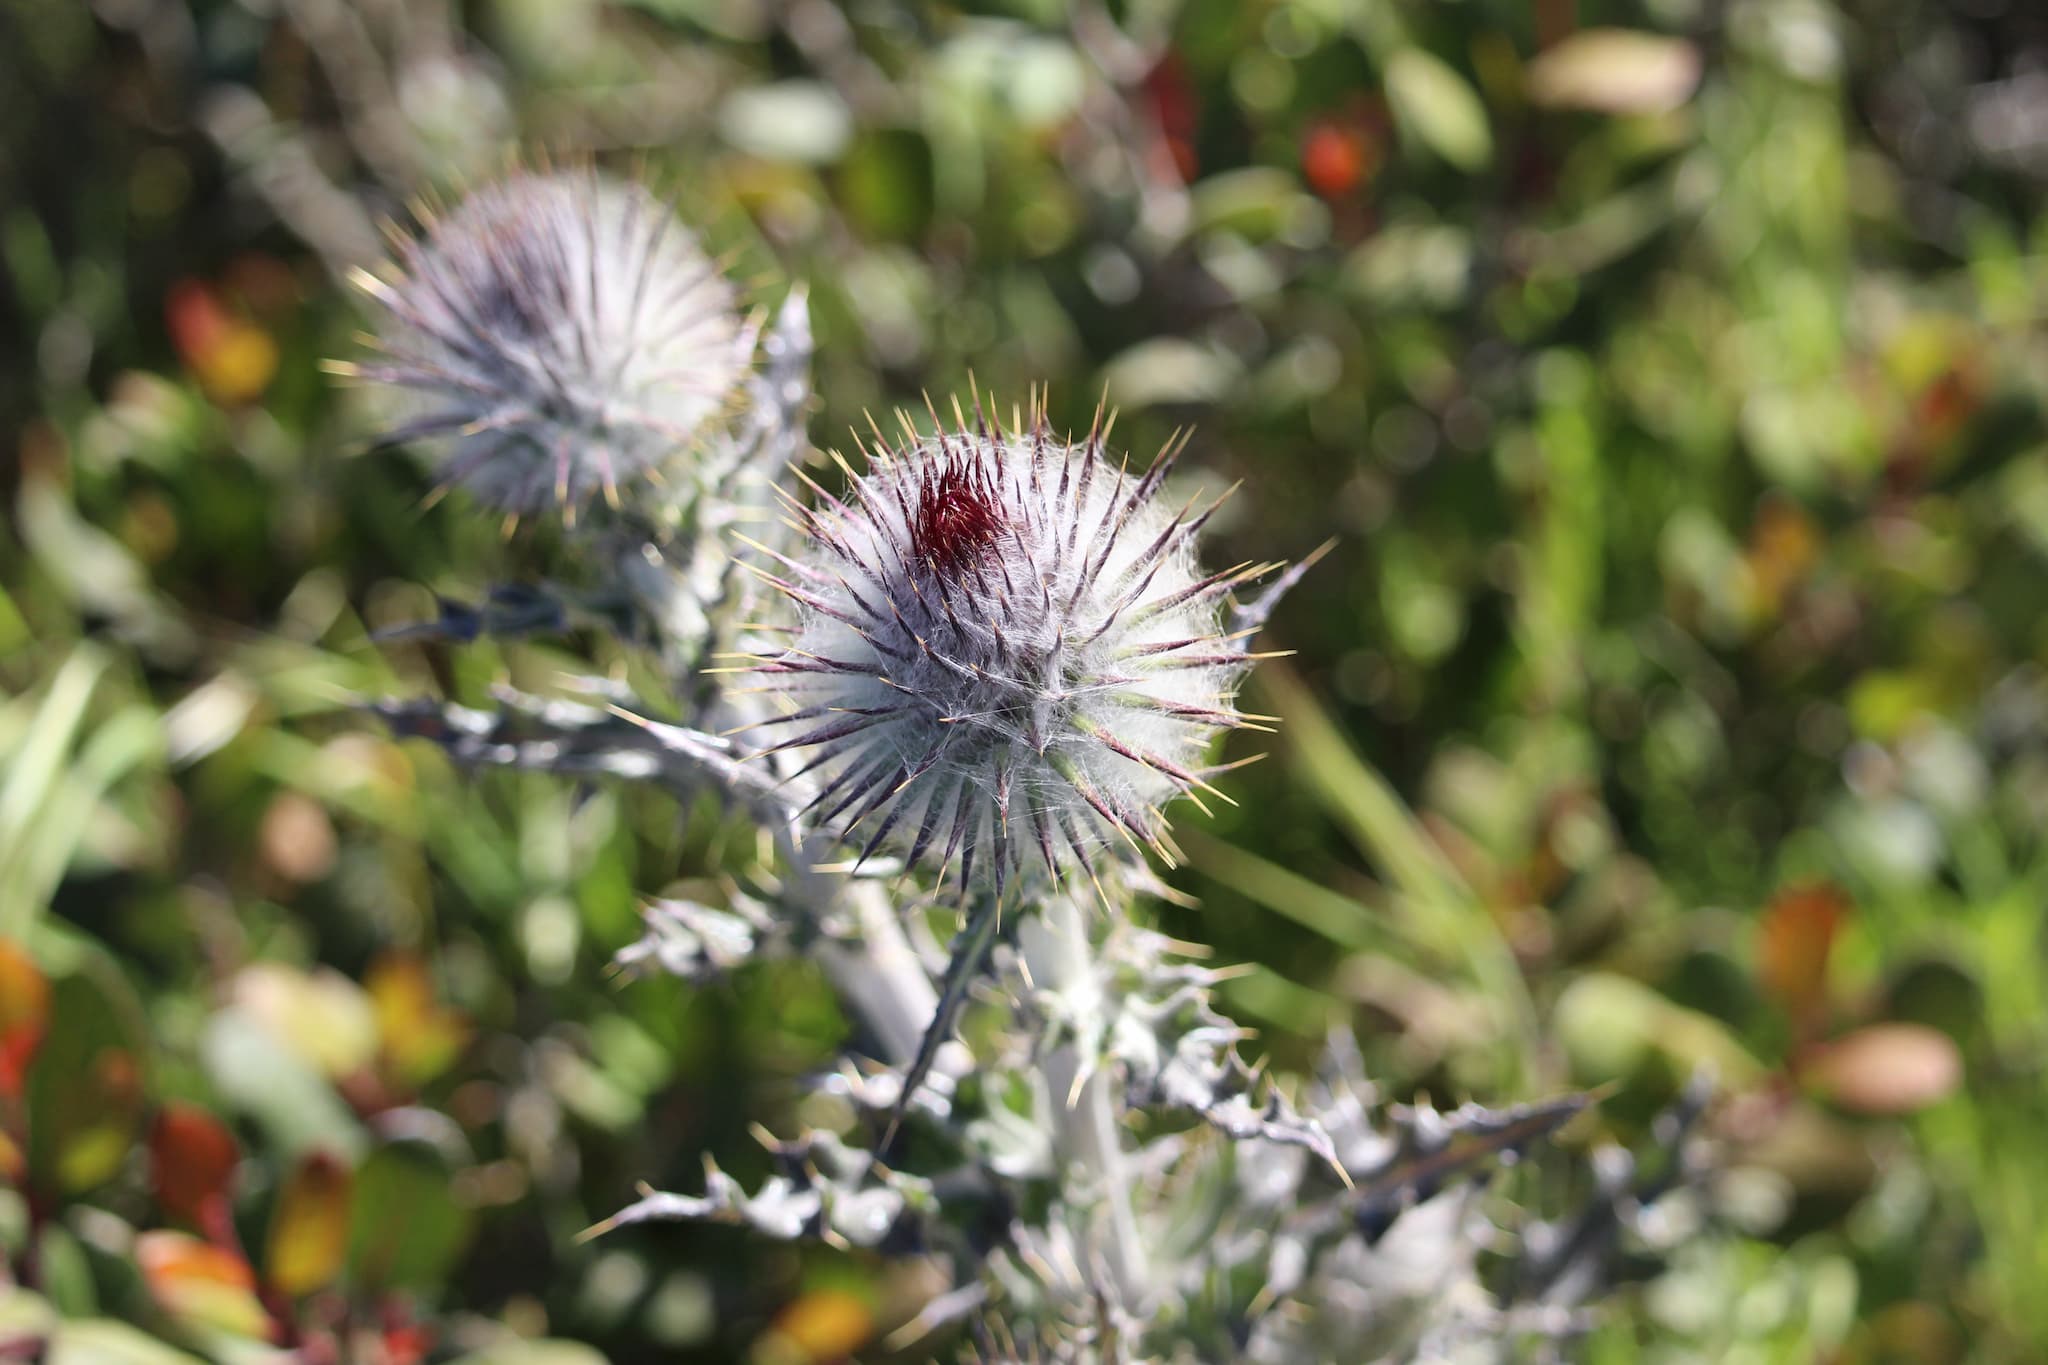 Spiny plant topped with a spiky ball wrapped with white threads.